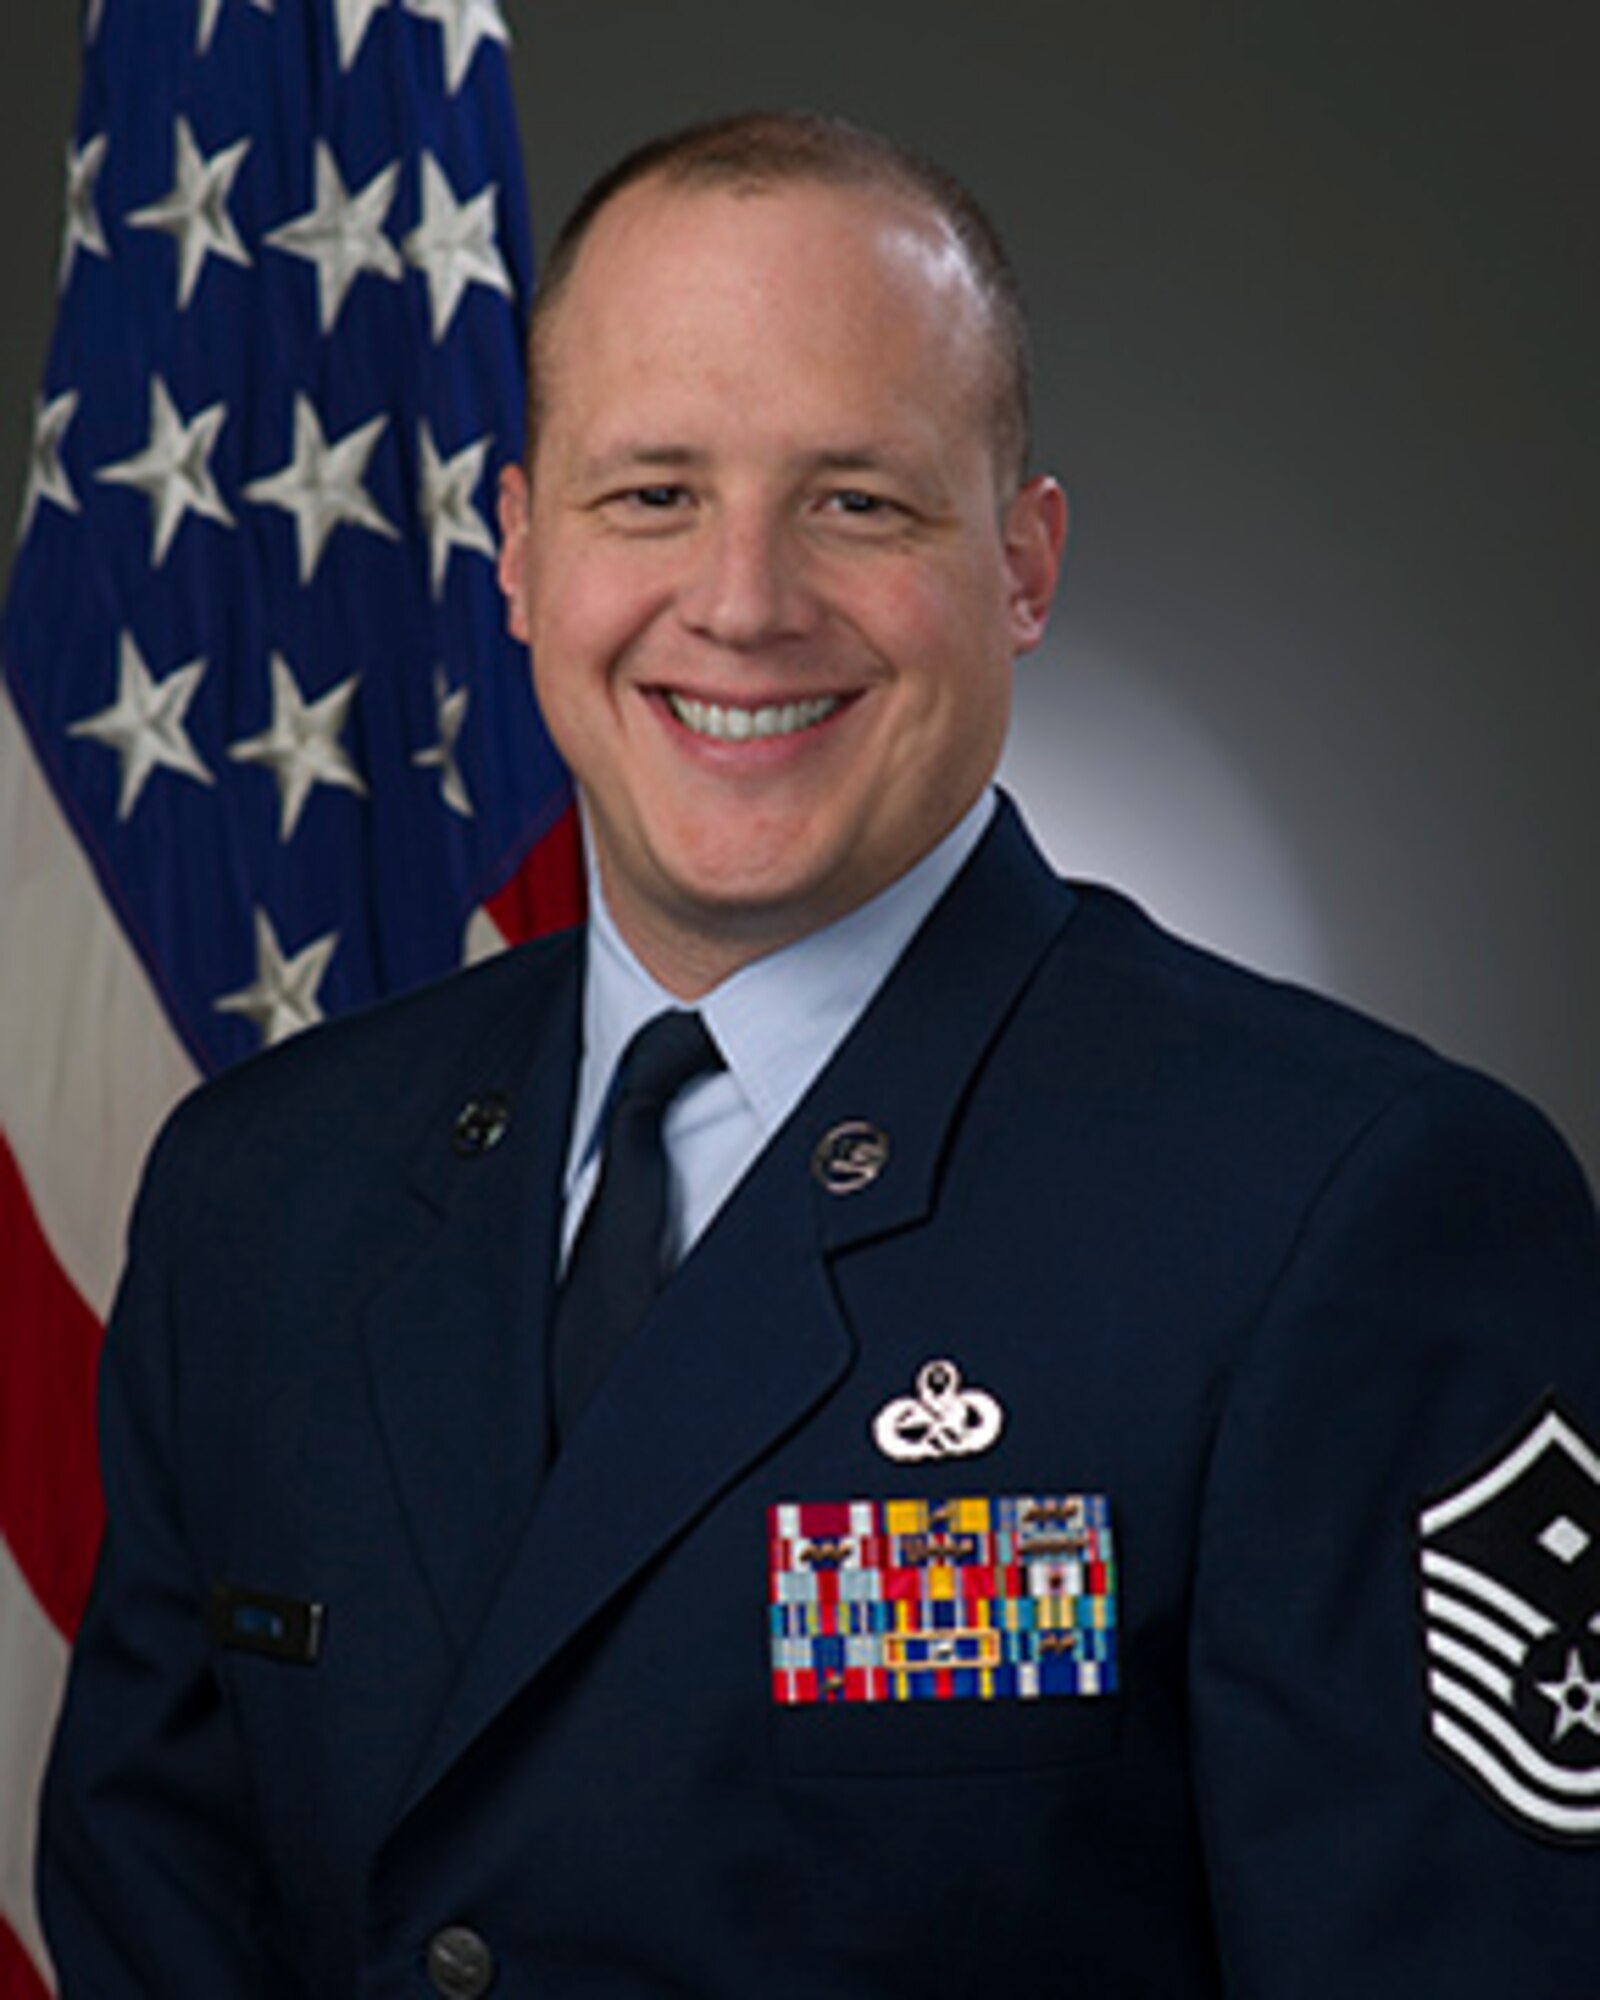 Commentary by Master Sgt. Benjamin Griffin, 60th Medical Support Squadron first sergeant